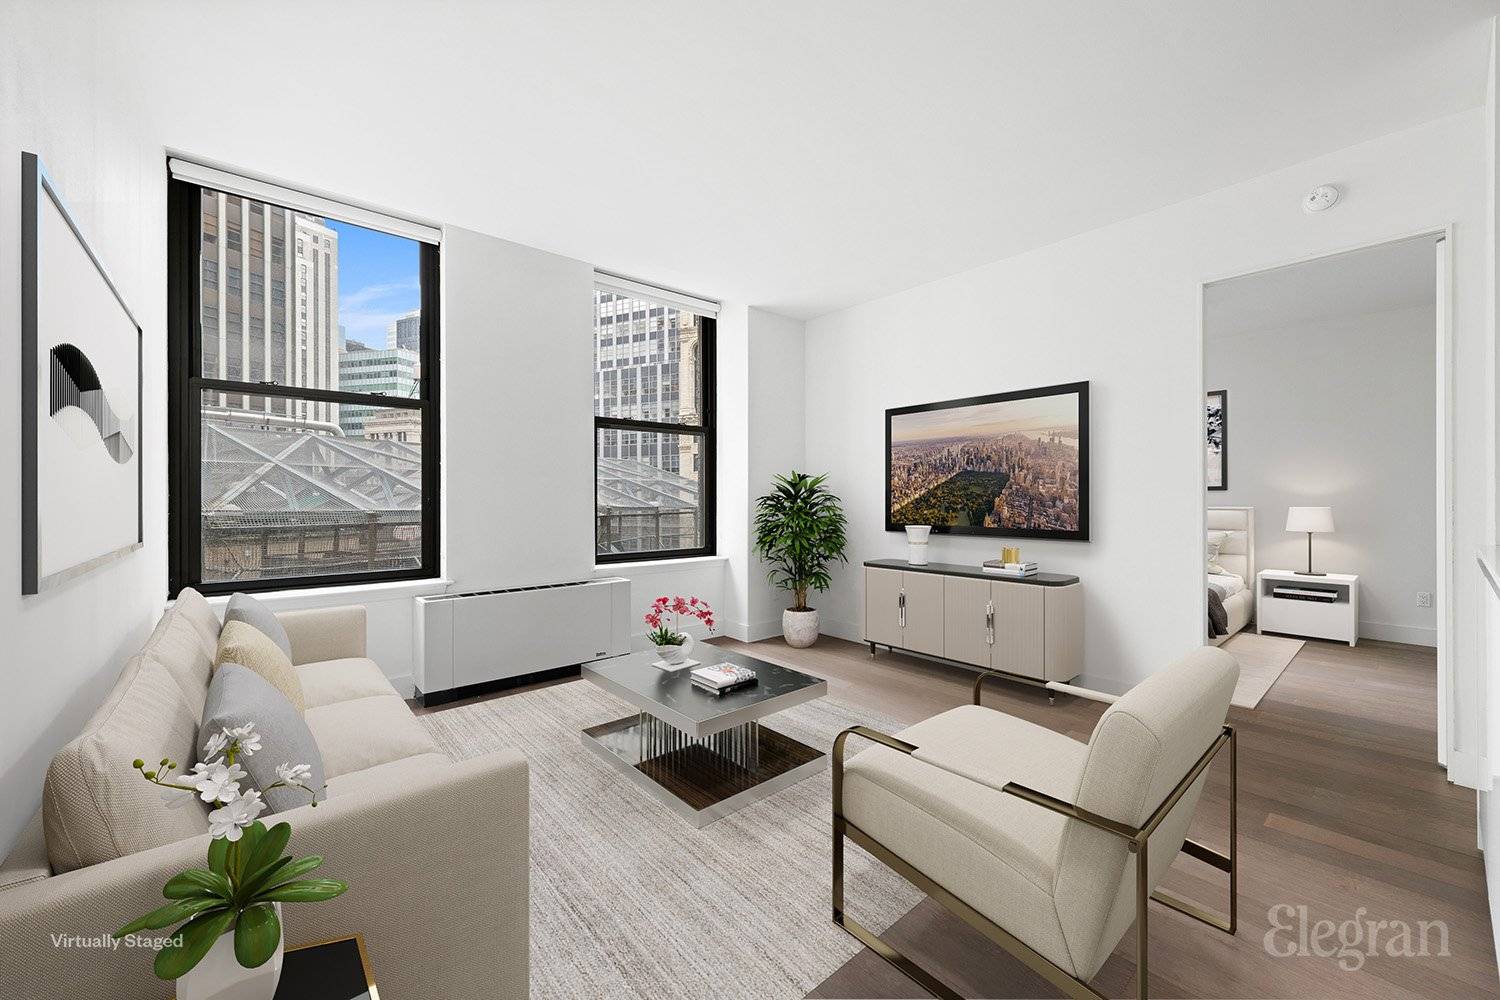 Available June 1st. Experience luxury living at its finest in this stunning, brand new 2 bedroom, 2 bath apartment located in the heart of the Financial District.